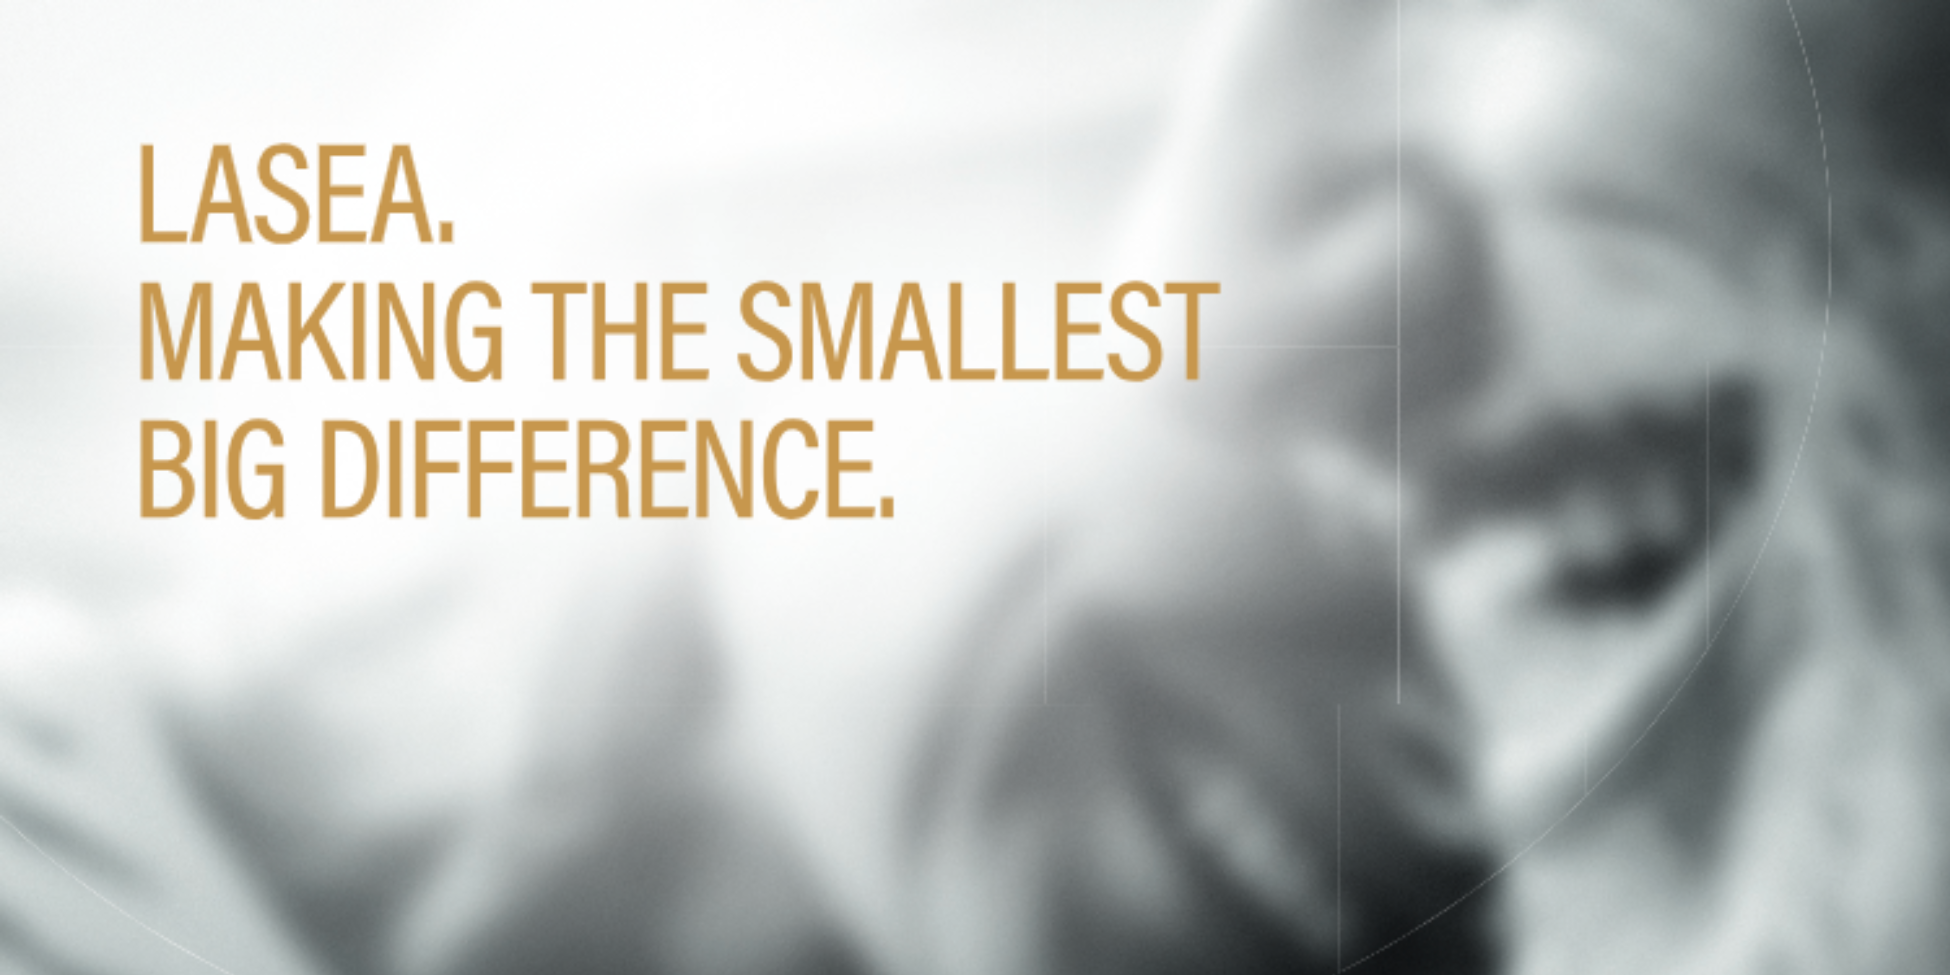 Photo of “Making the smallest big difference